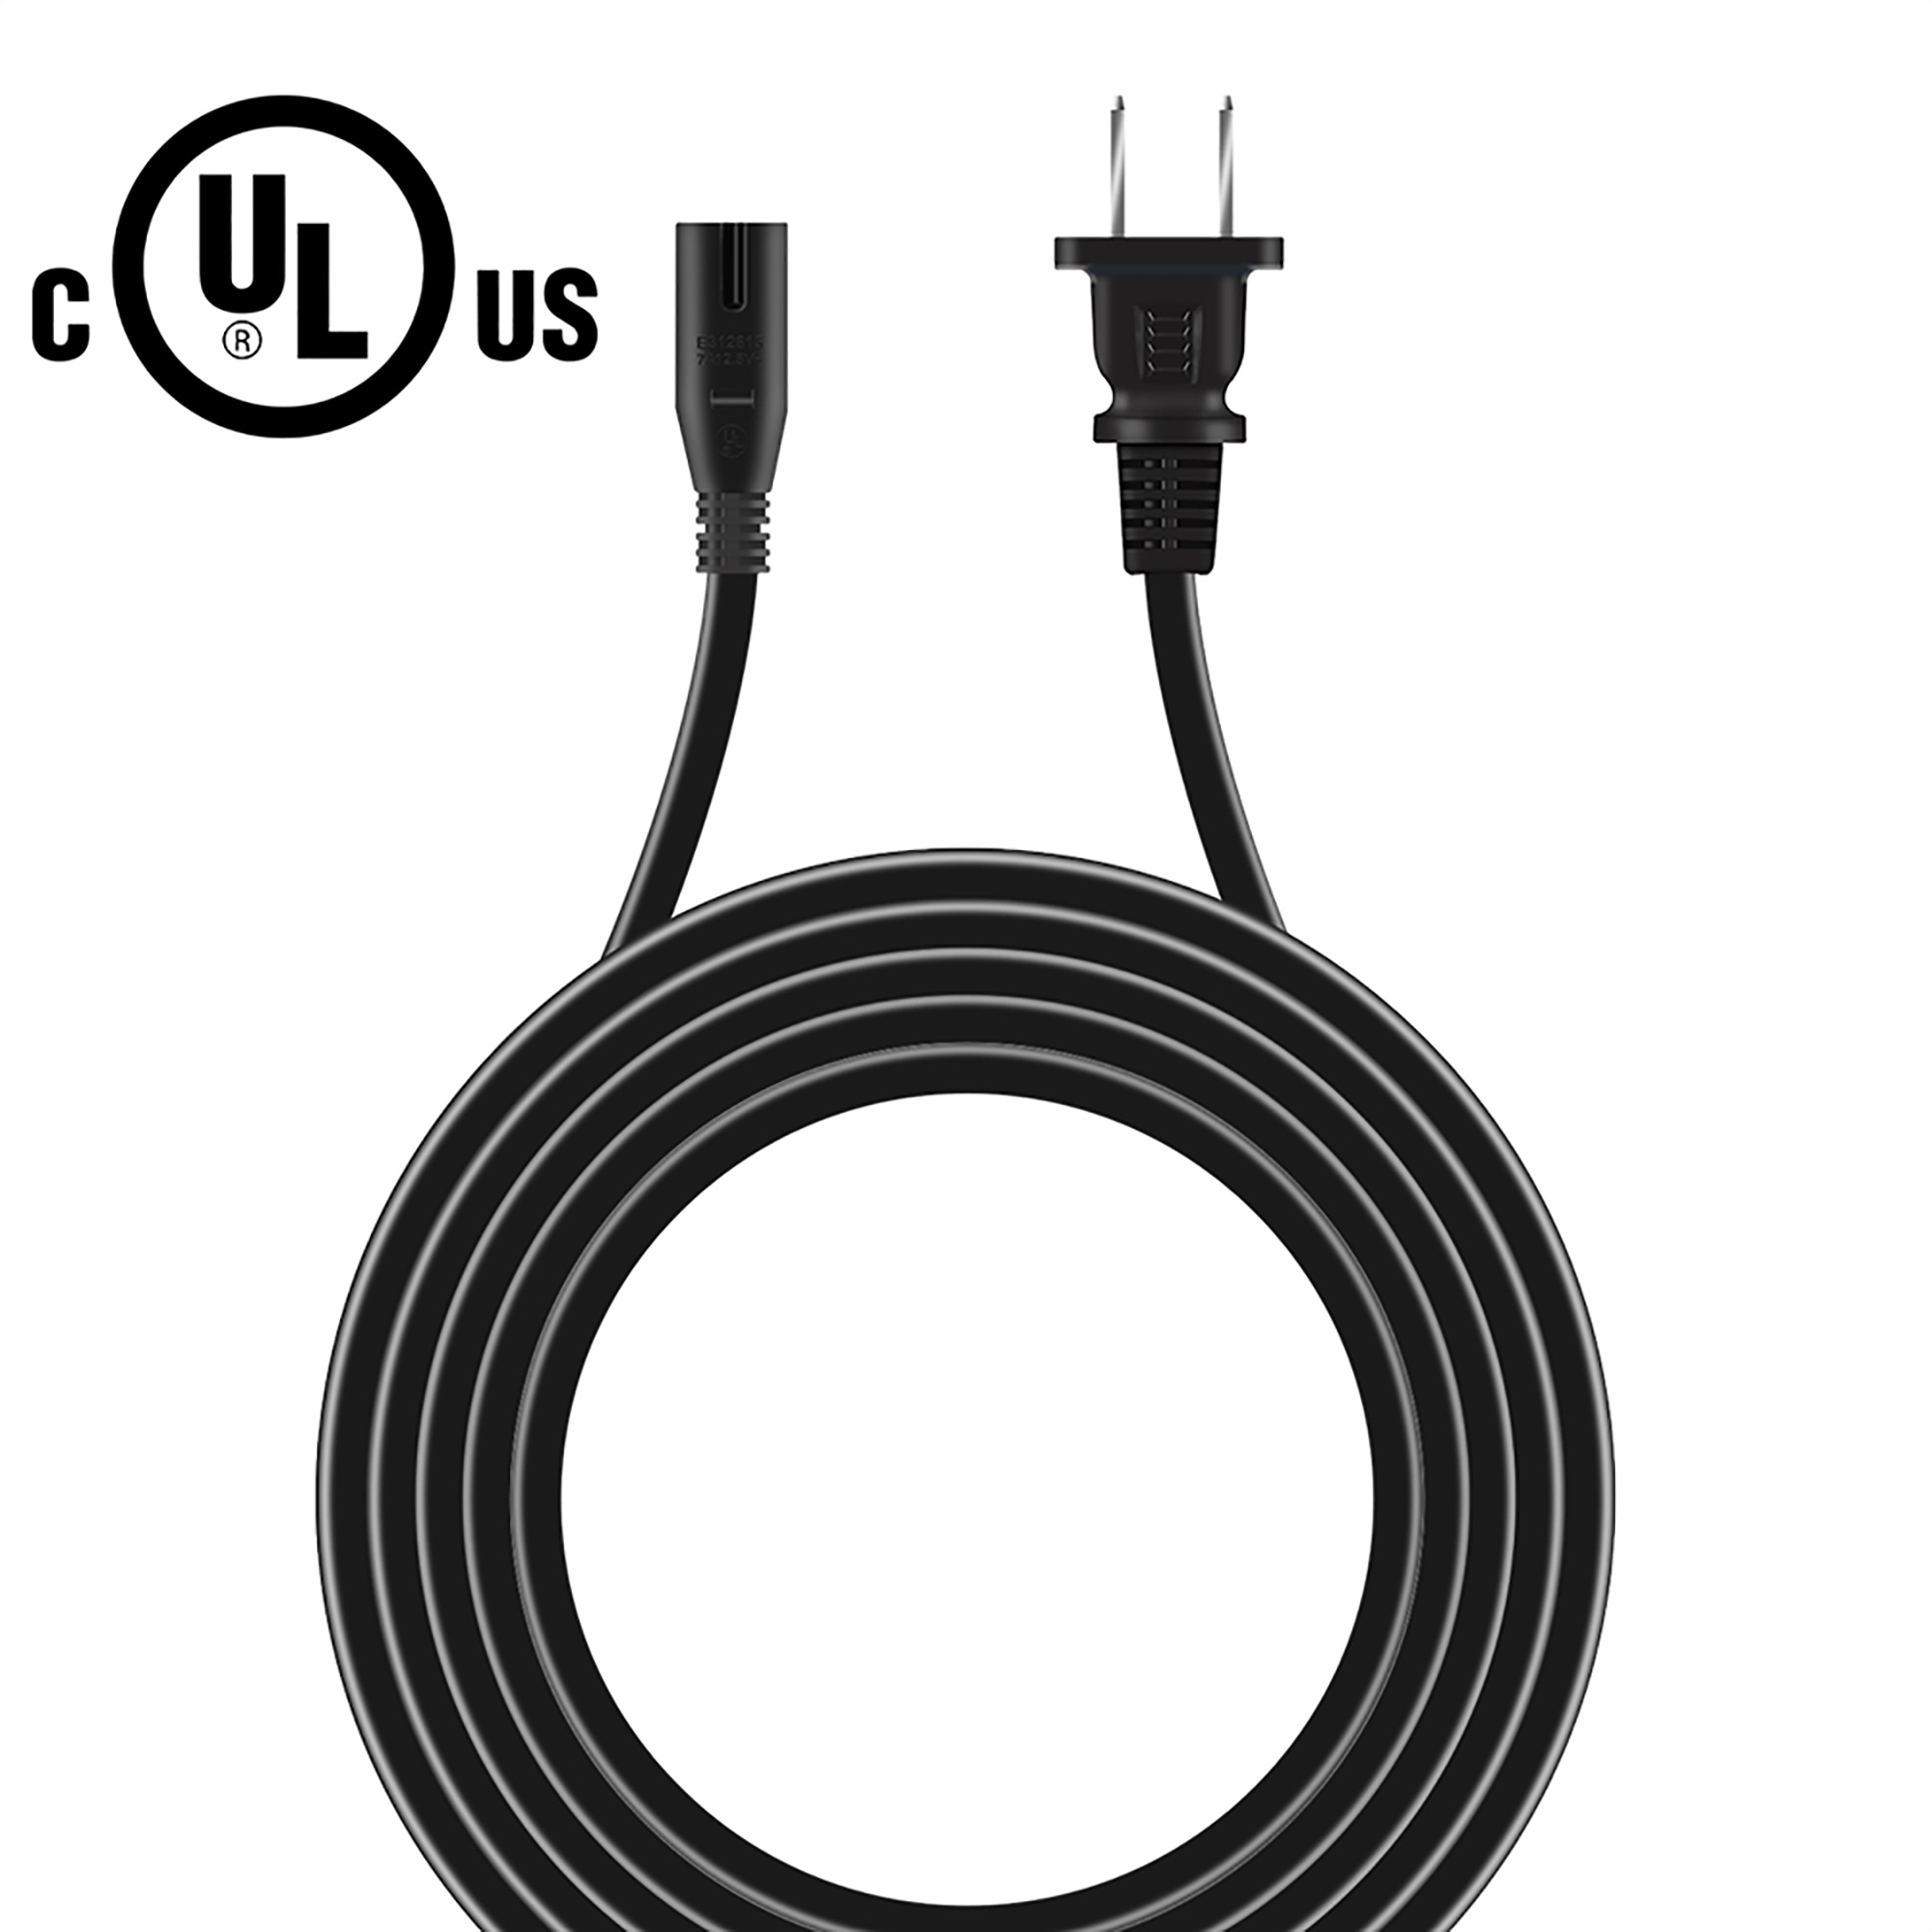 PKPOWER AC Power Cord for Monster BTW249 40W High Performance In/Outdoor Speaker - image 1 of 3